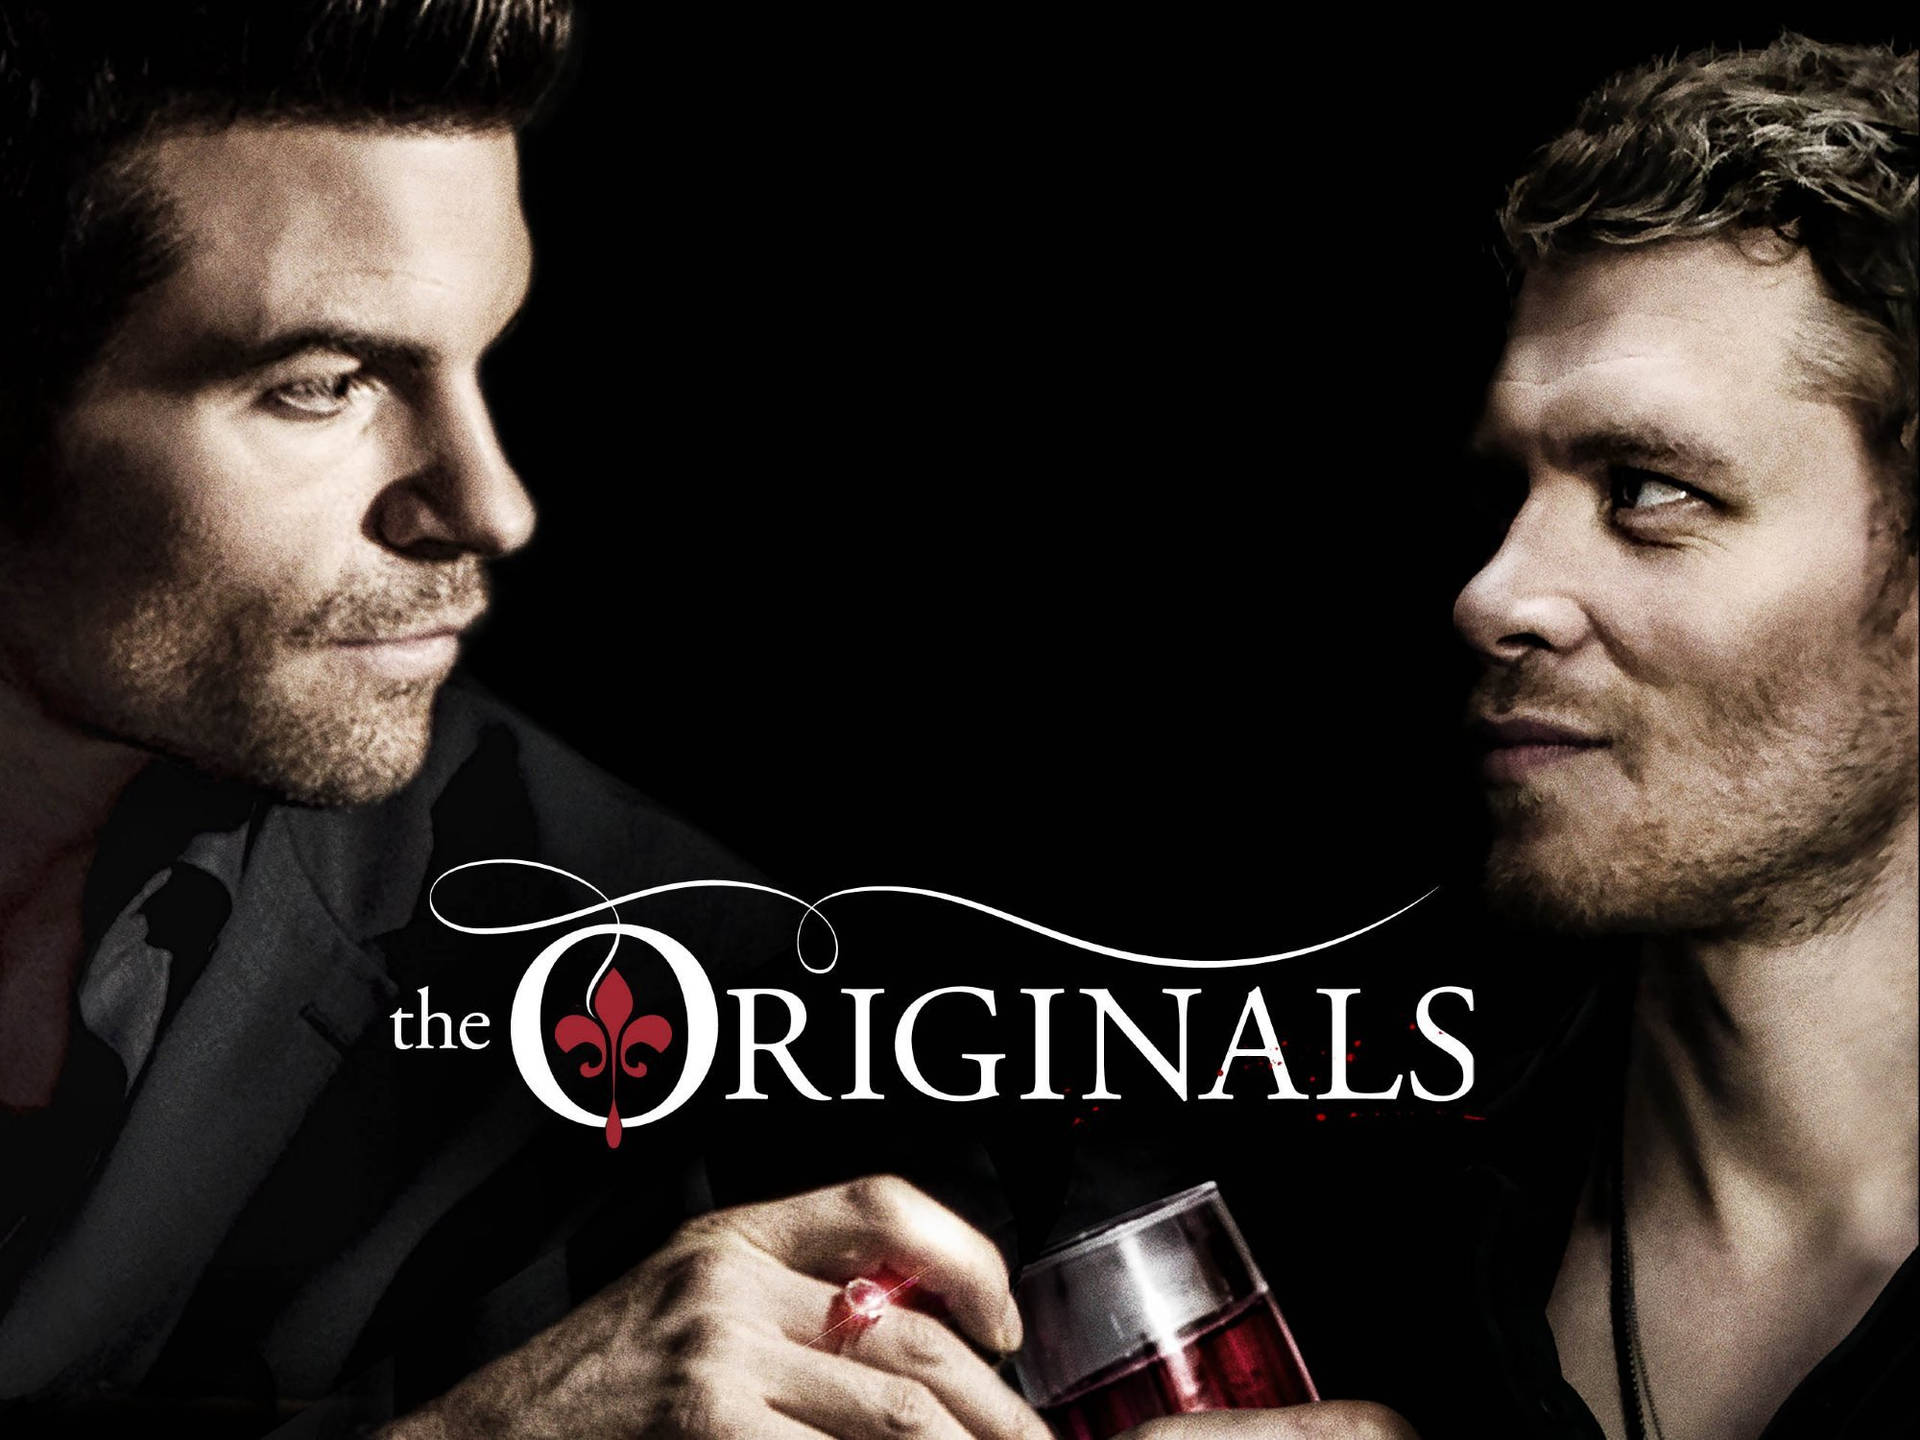 The Originals Mikaelson Brothers Cover Wallpaper